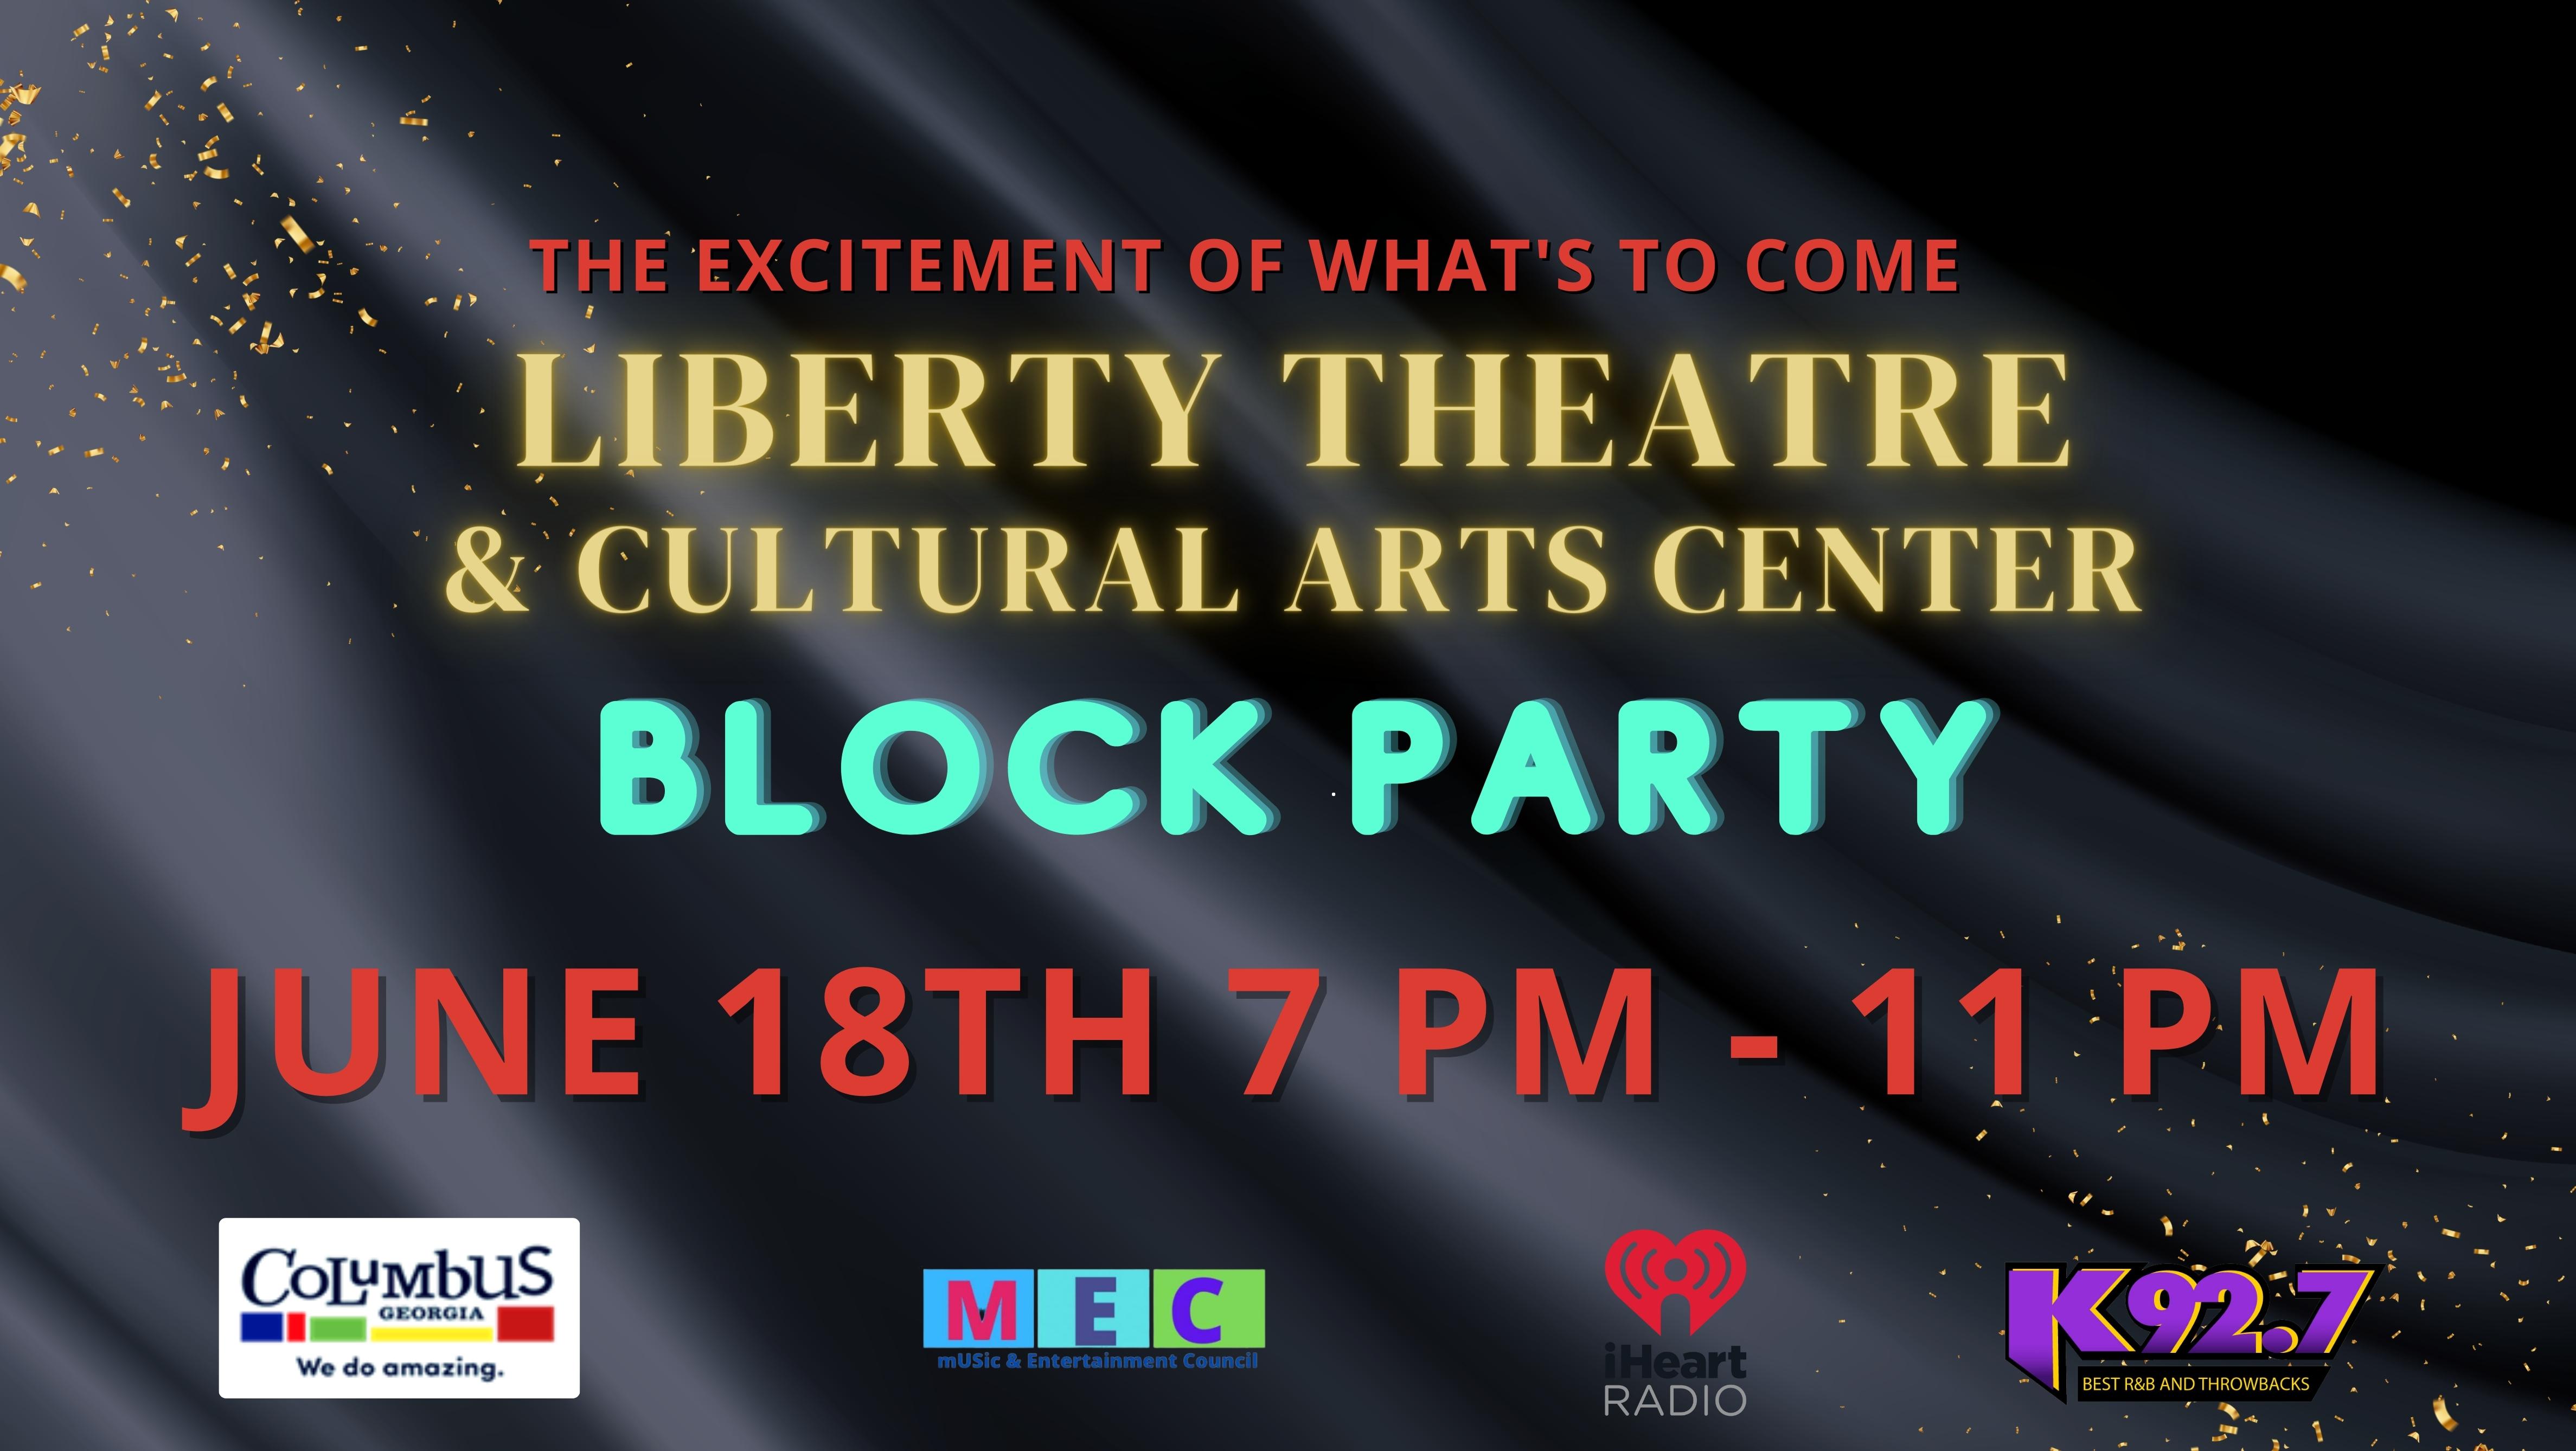 Block Party Flyer June 18th 7pm to 11pm